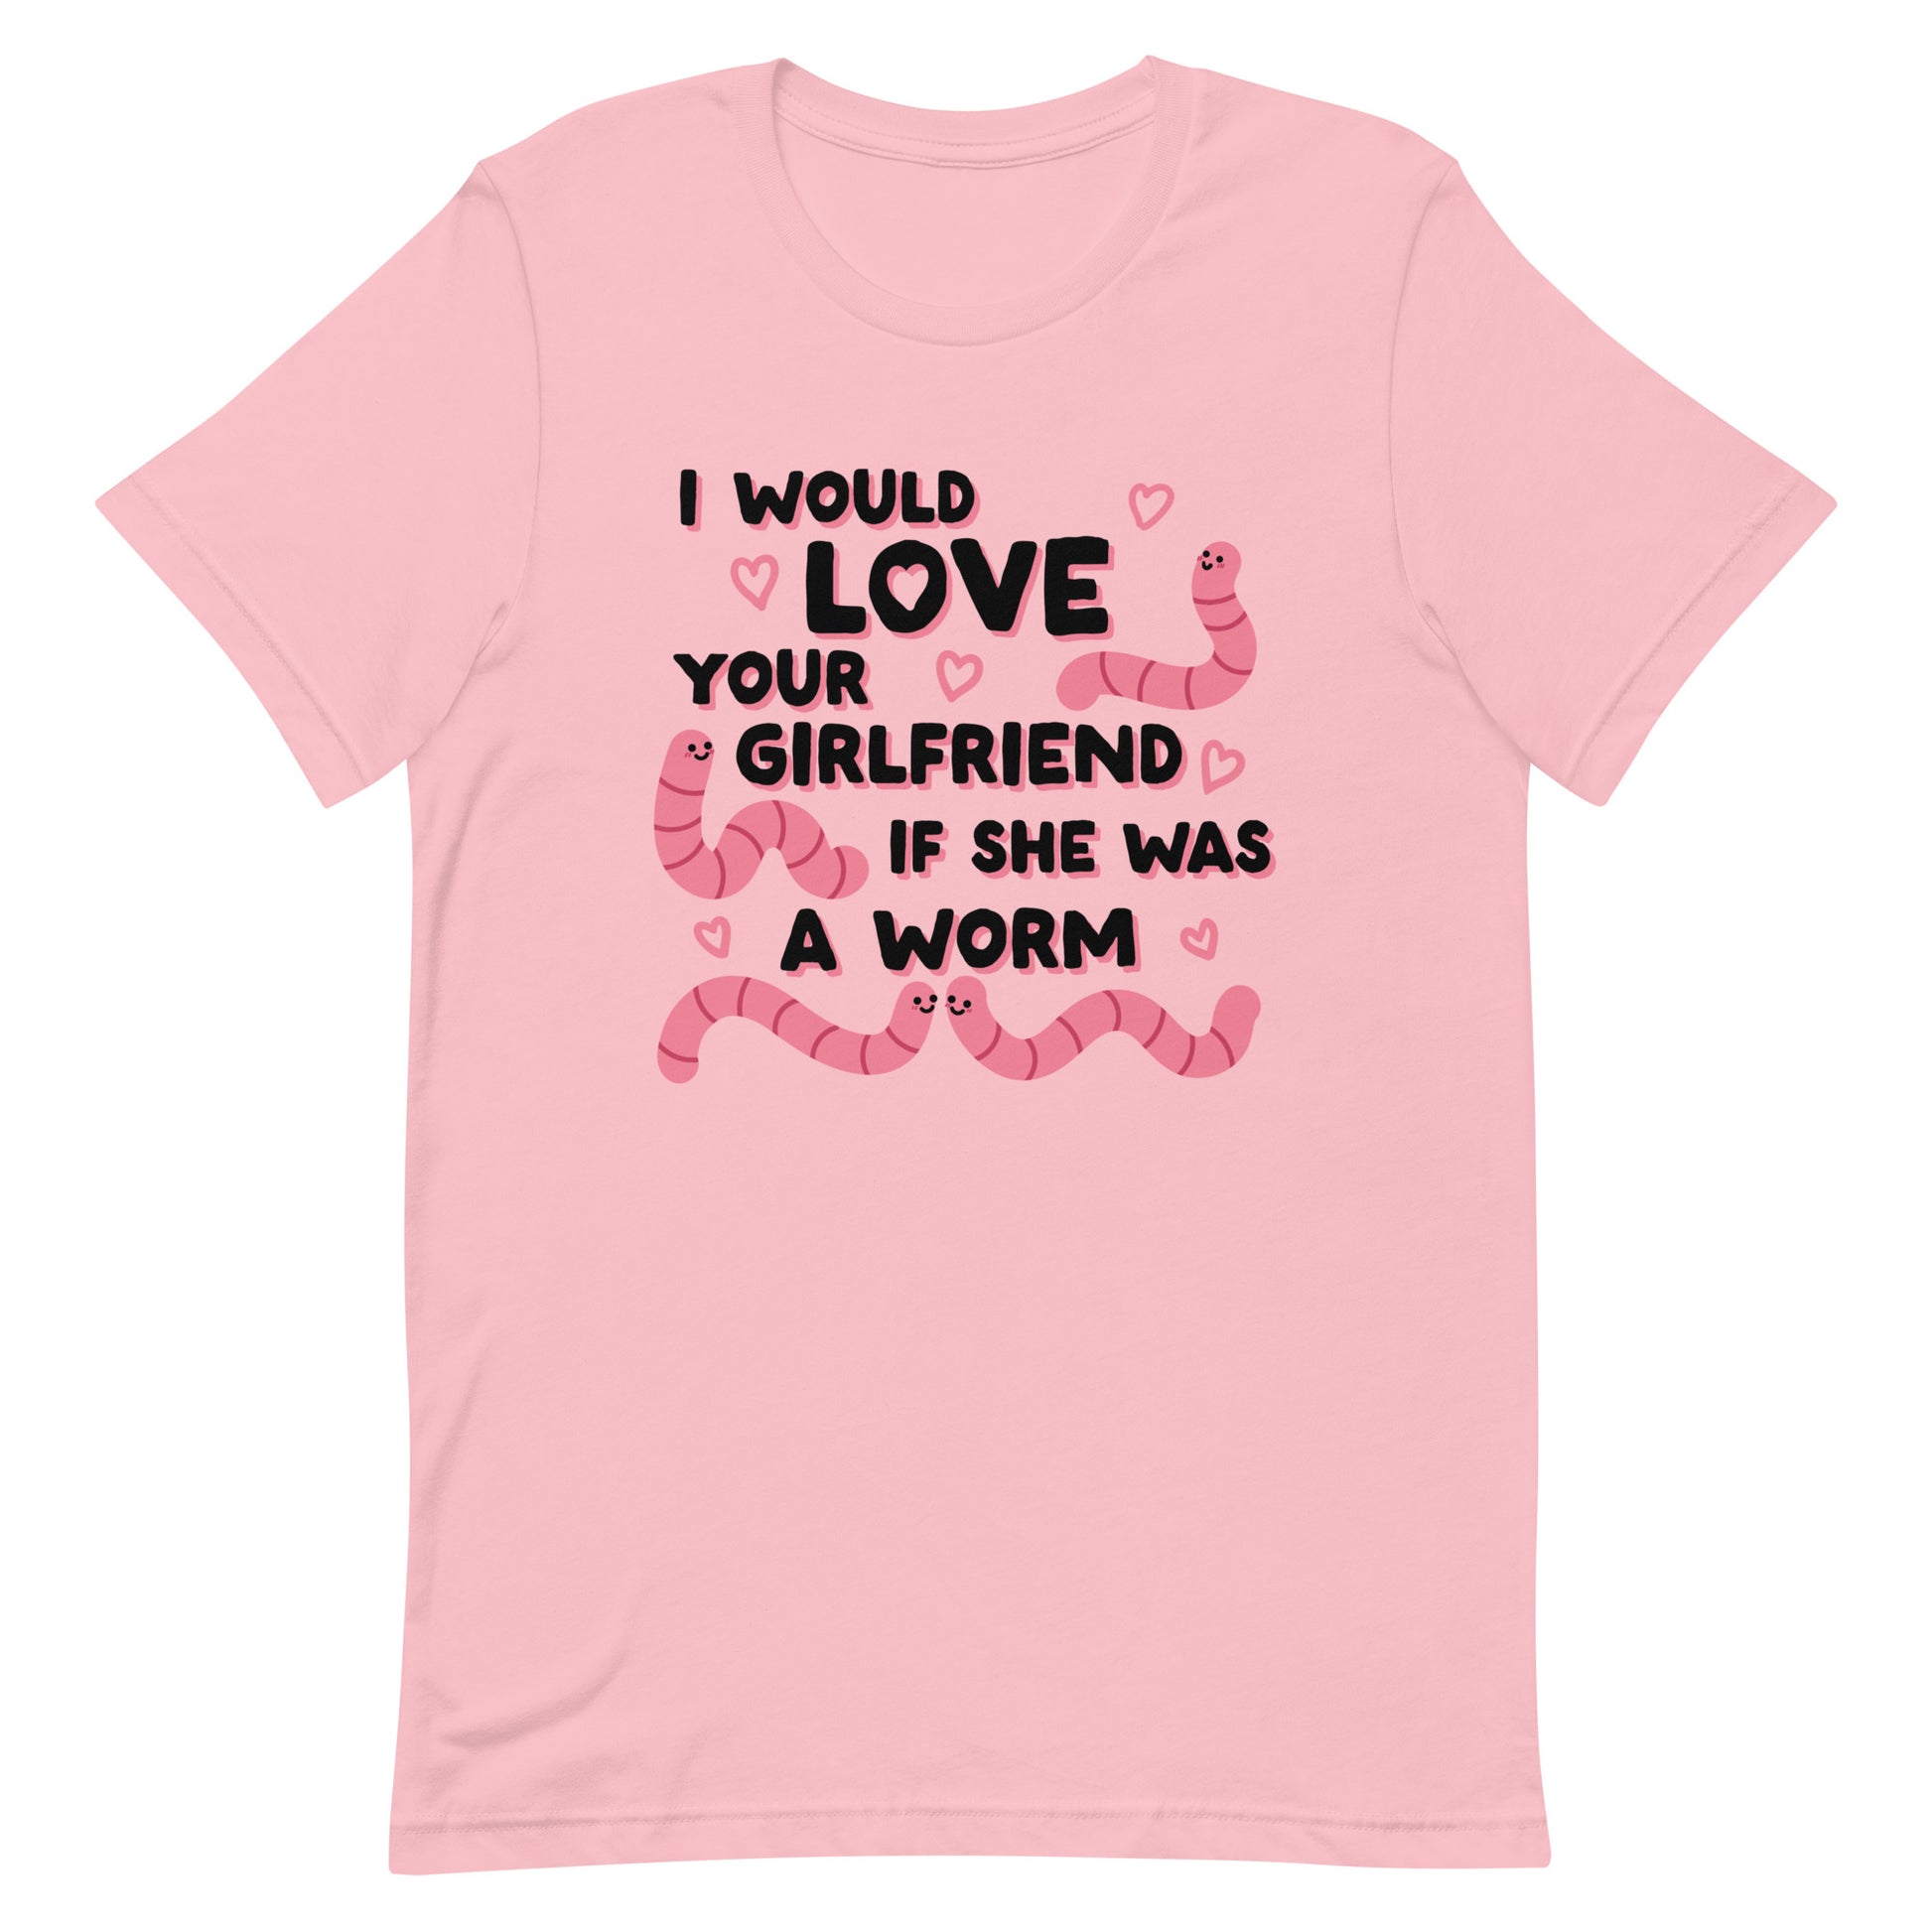 A pink crewneck t-shirt featuring text that reads "I would love your girlfriend if she was a worm". Cute cartoon worms and hearts surround the text.